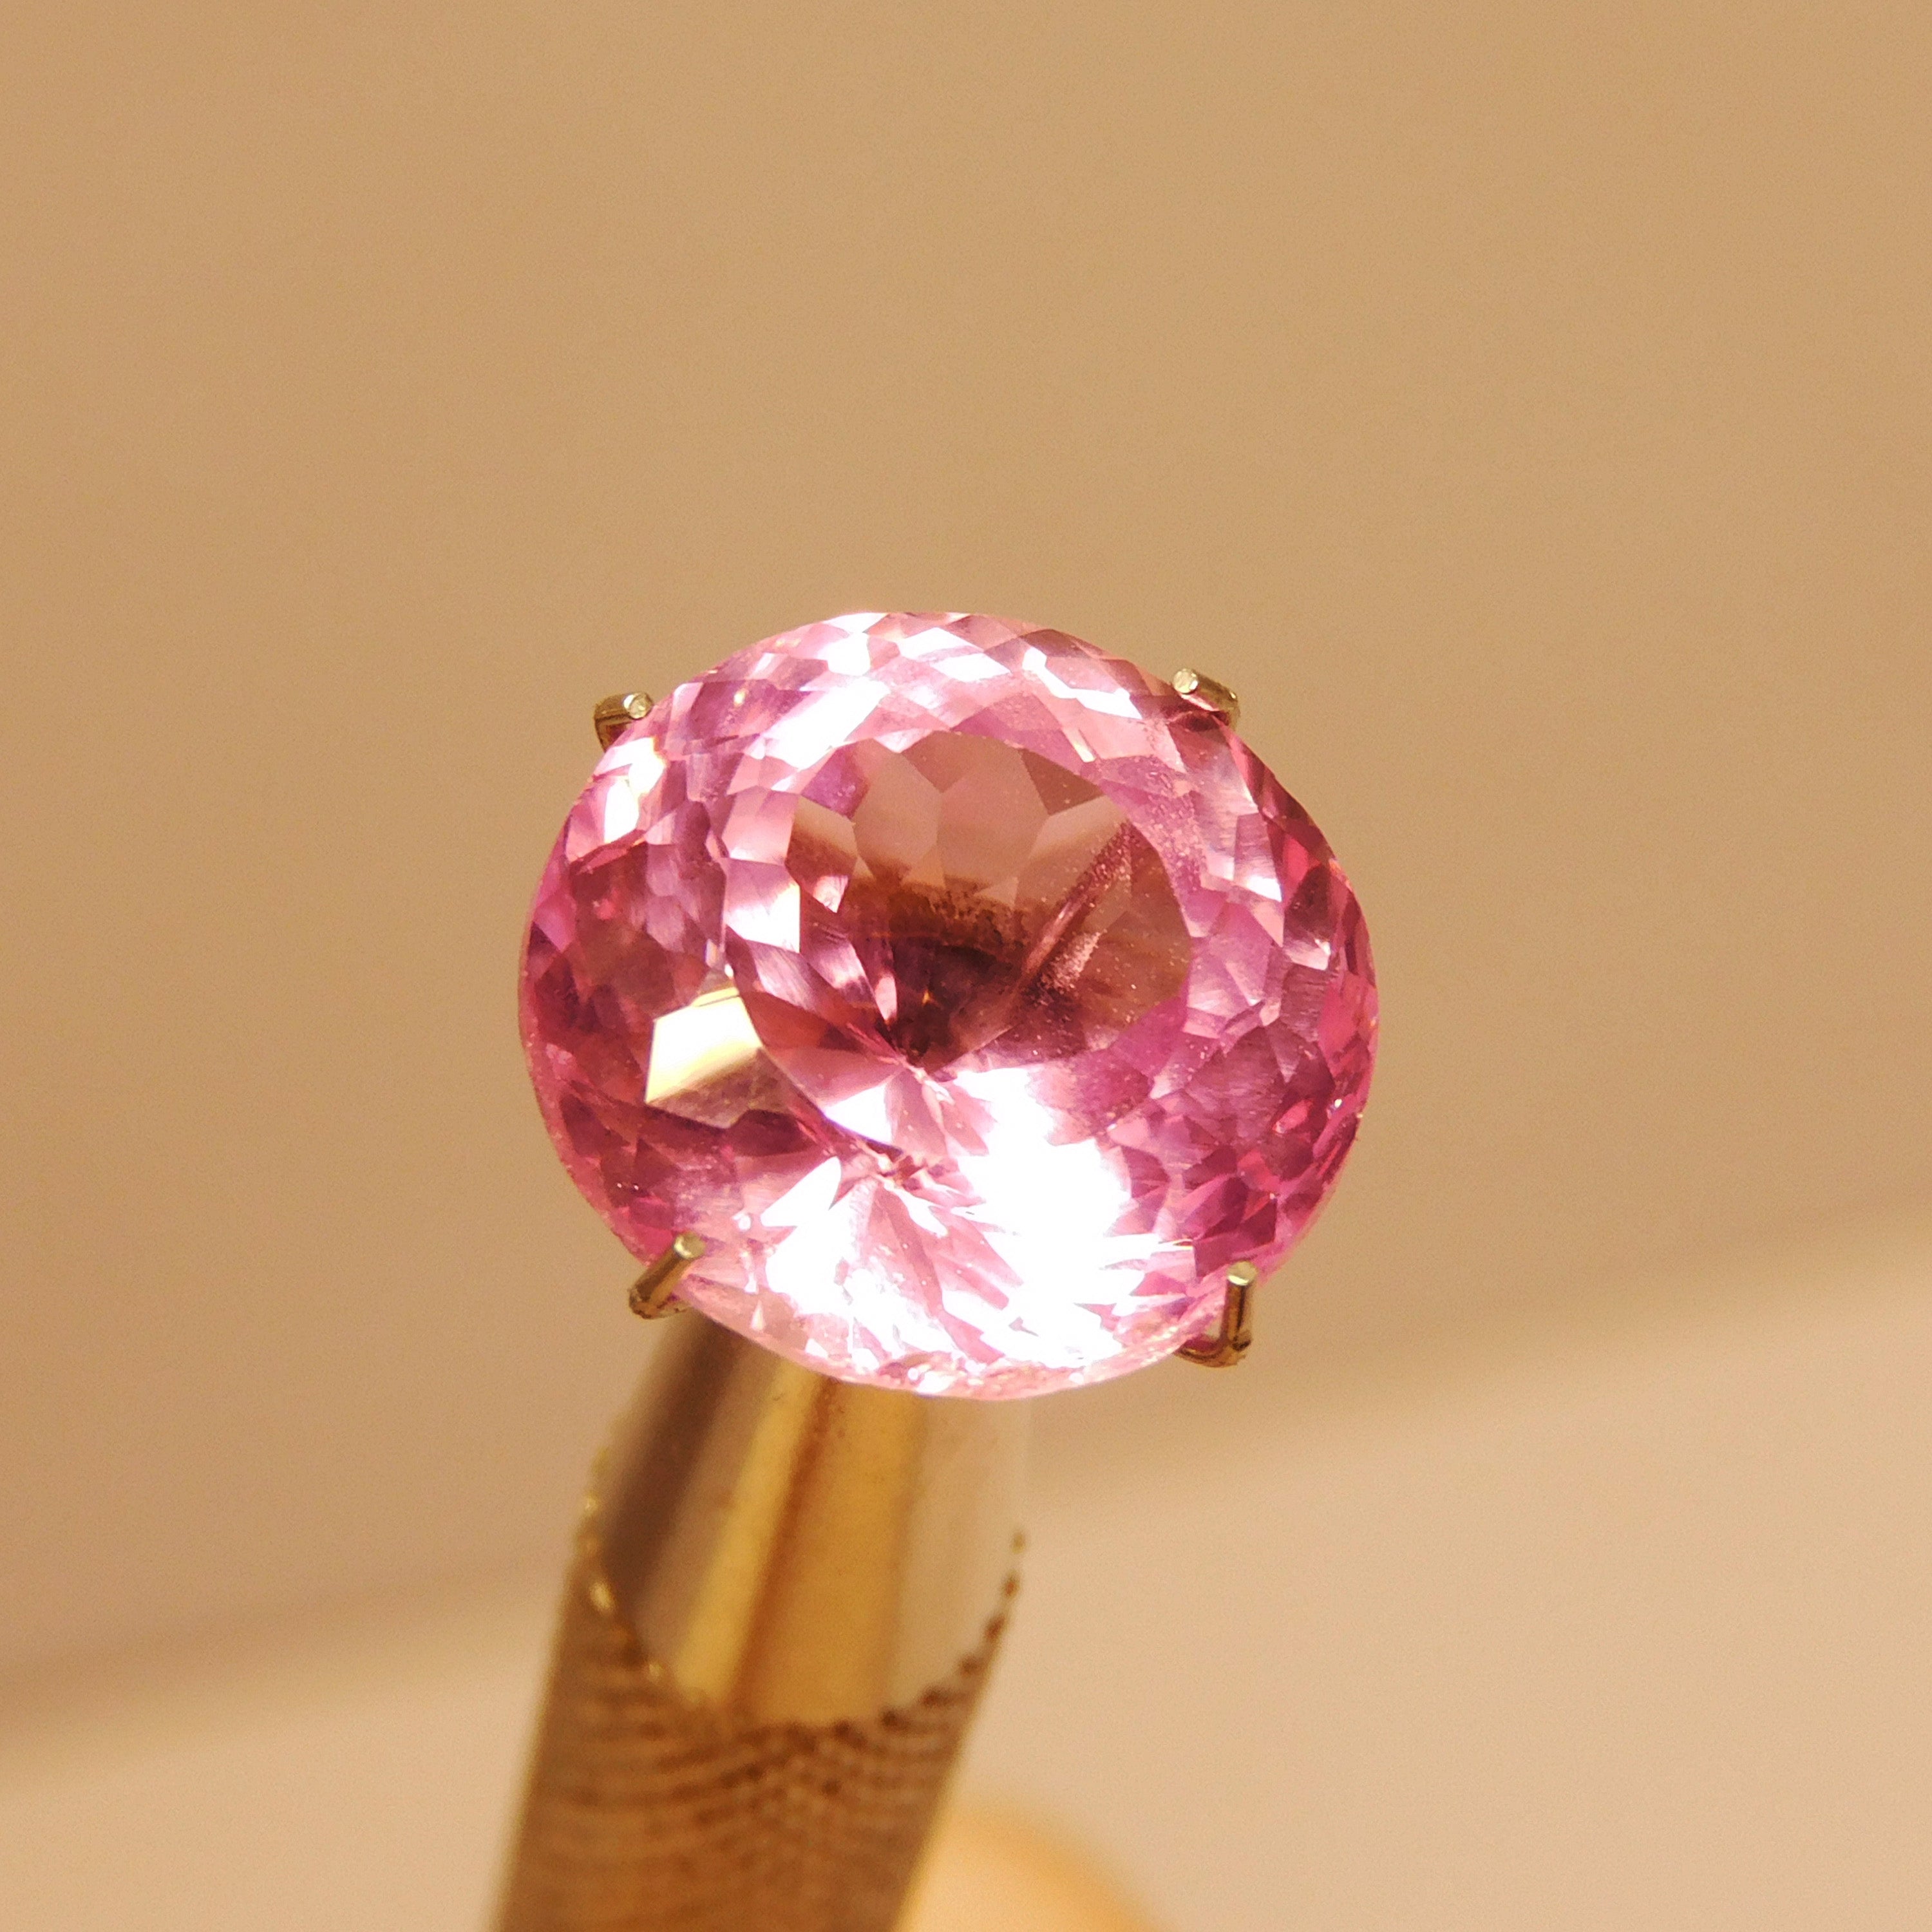 Light Pink Sapphire 7.95 Carat Round Cut Natural Sapphire Loose Gemstone CERTIFIED | Best Offer | Gift For Her/ Him